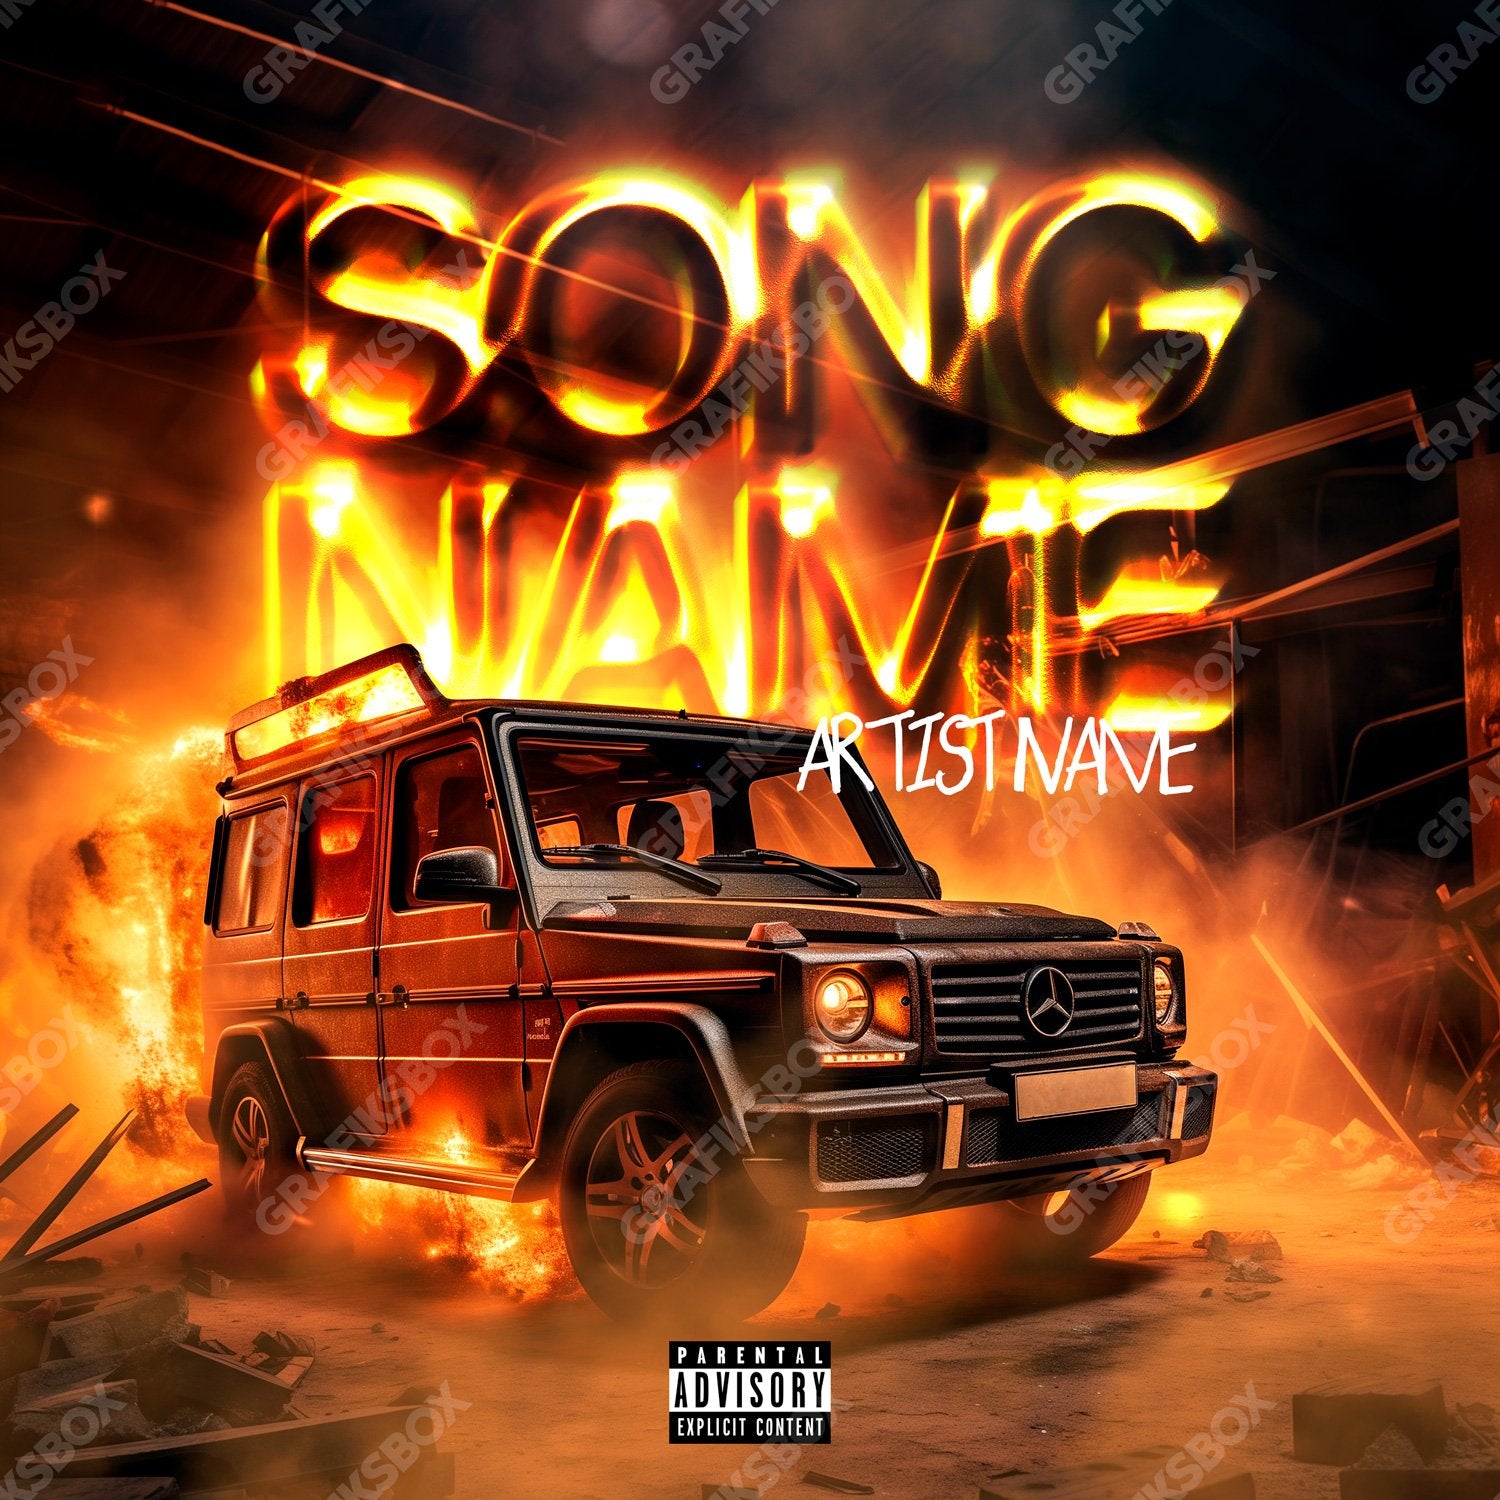 Hell Jeep premade cover art